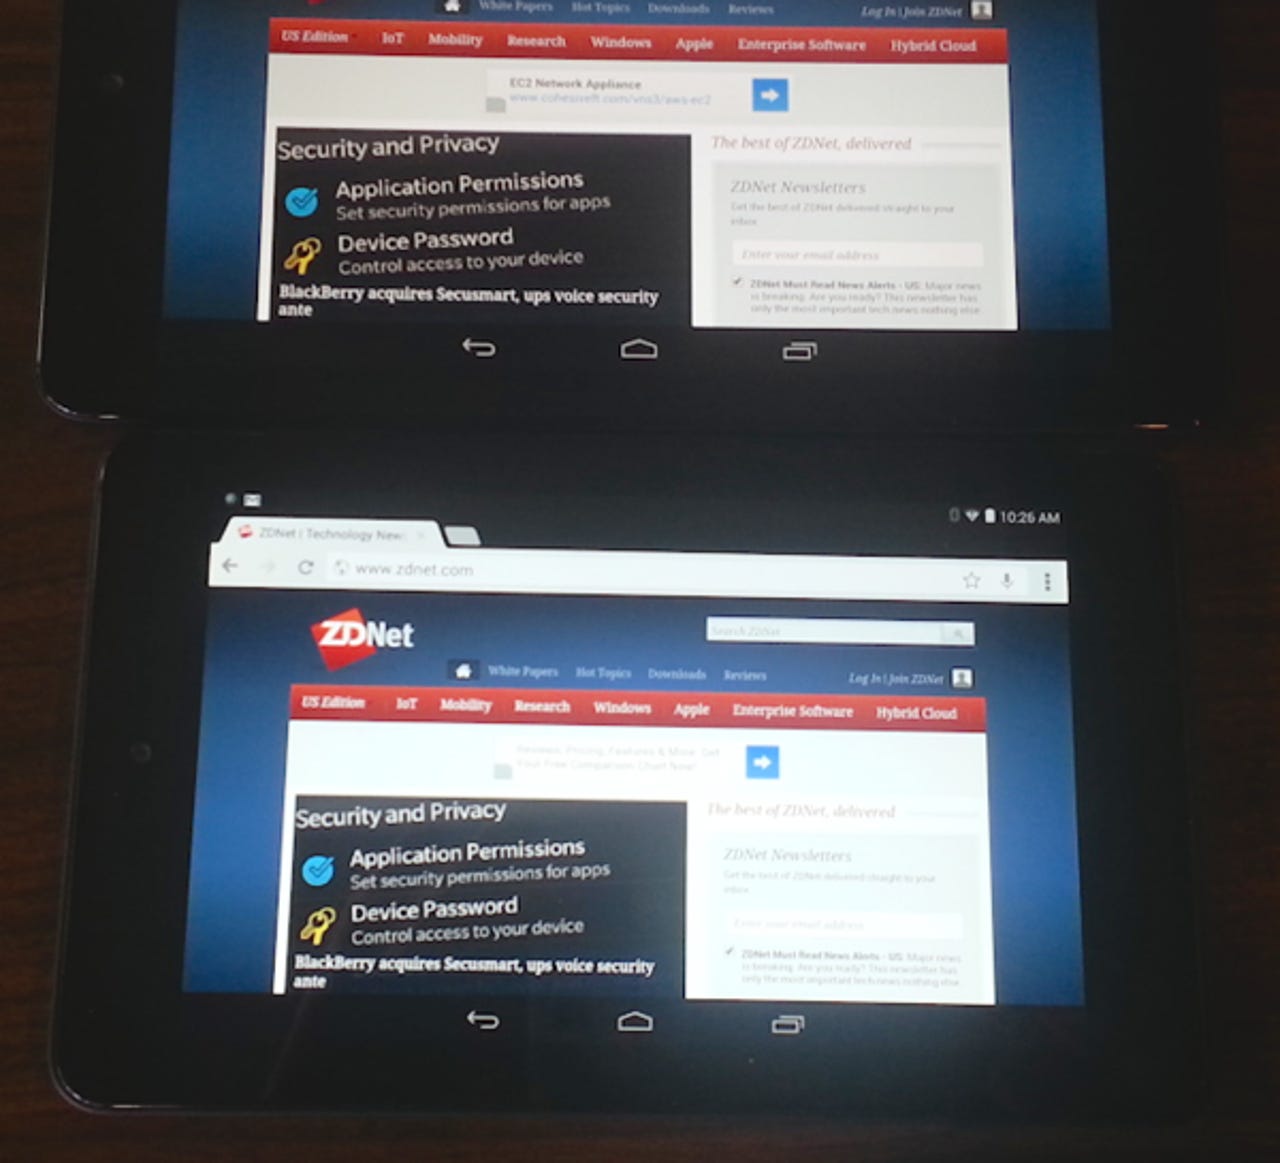 05-dell-venue-7-and-8-browser-comp.jpg